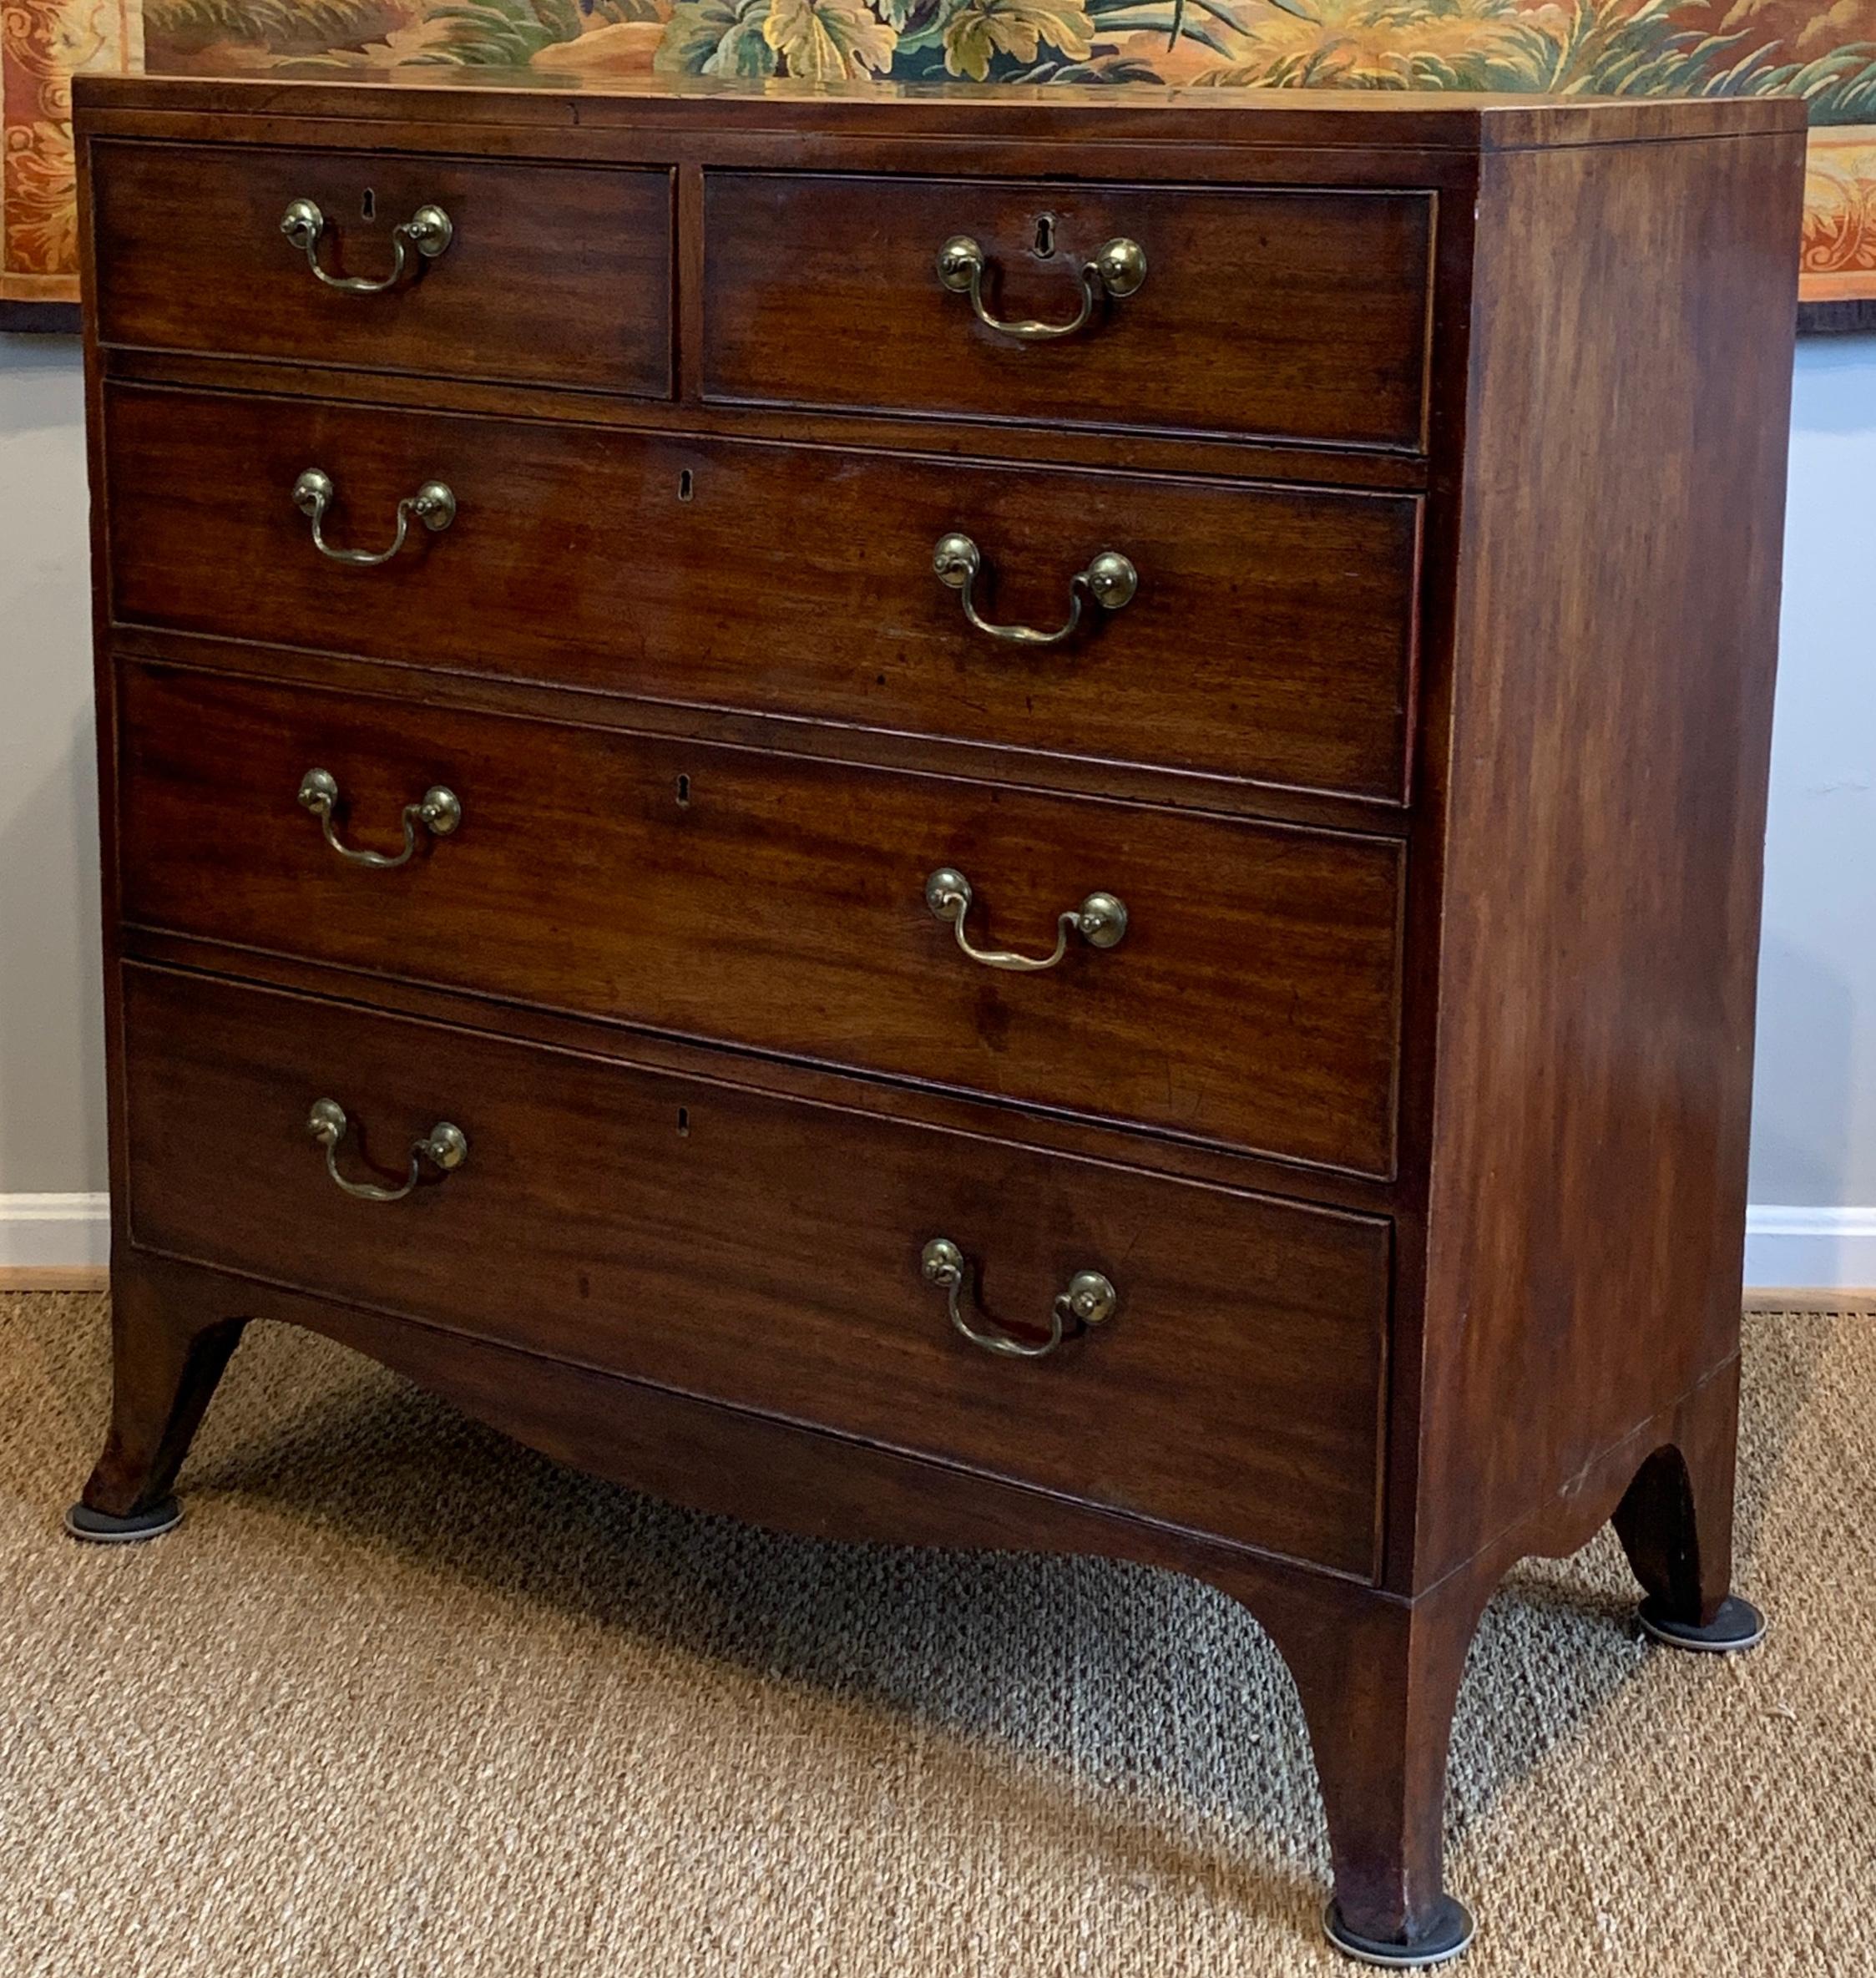 George III Early 19th Century English Mahogany Chest of Drawers